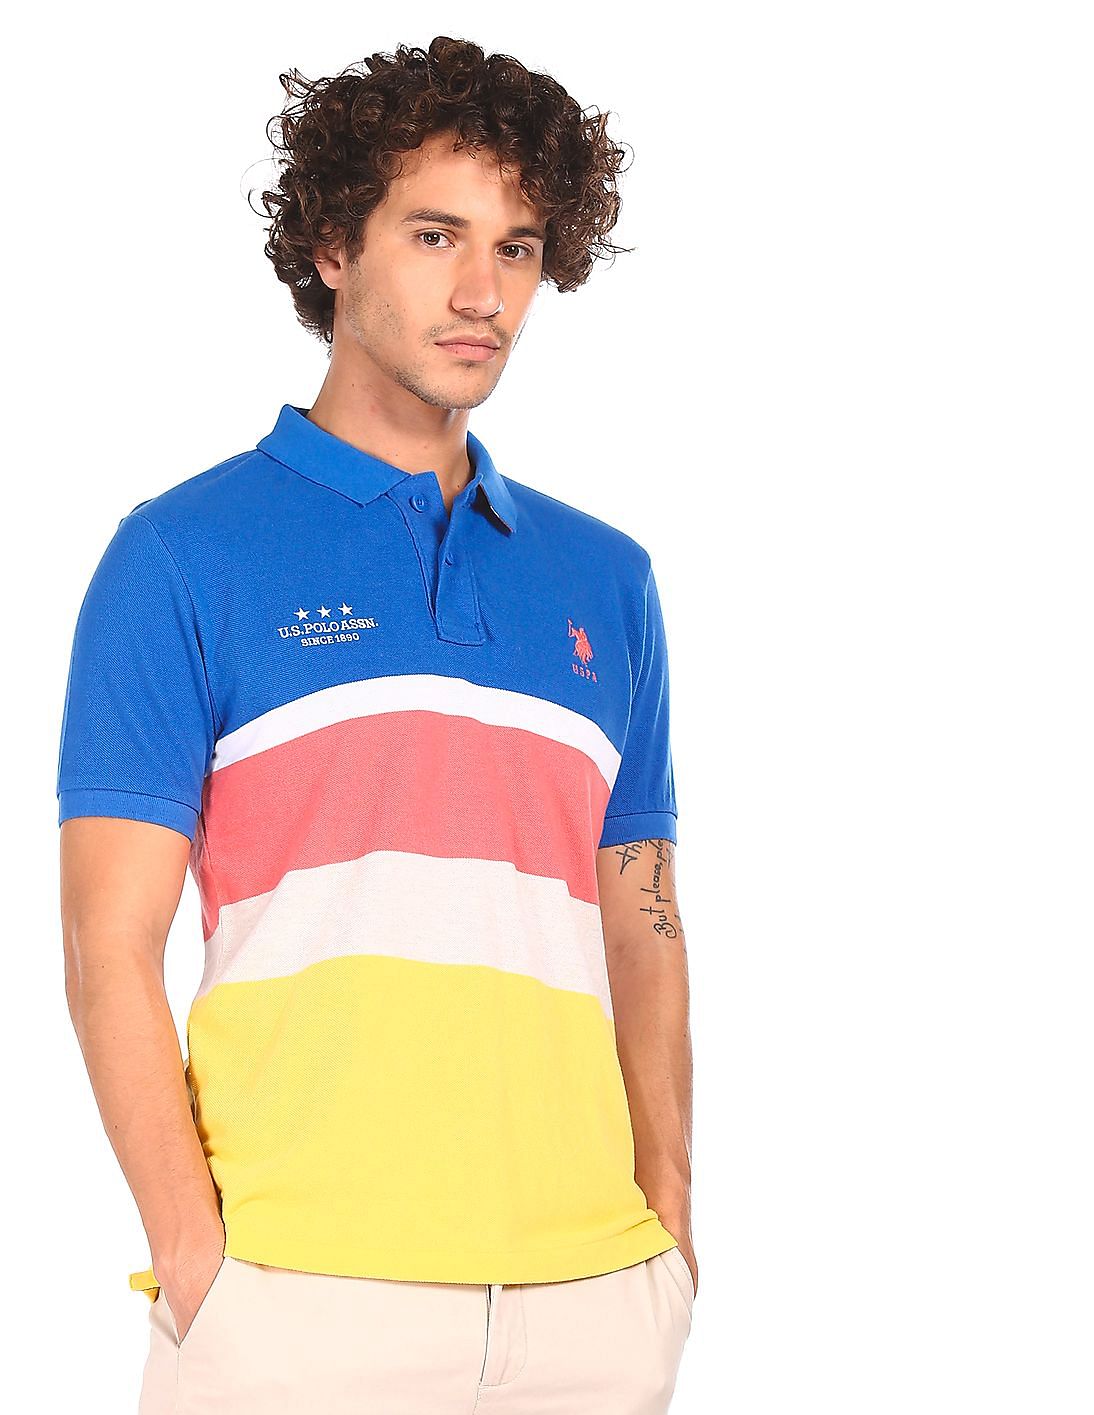 blue and yellow striped polo shirt